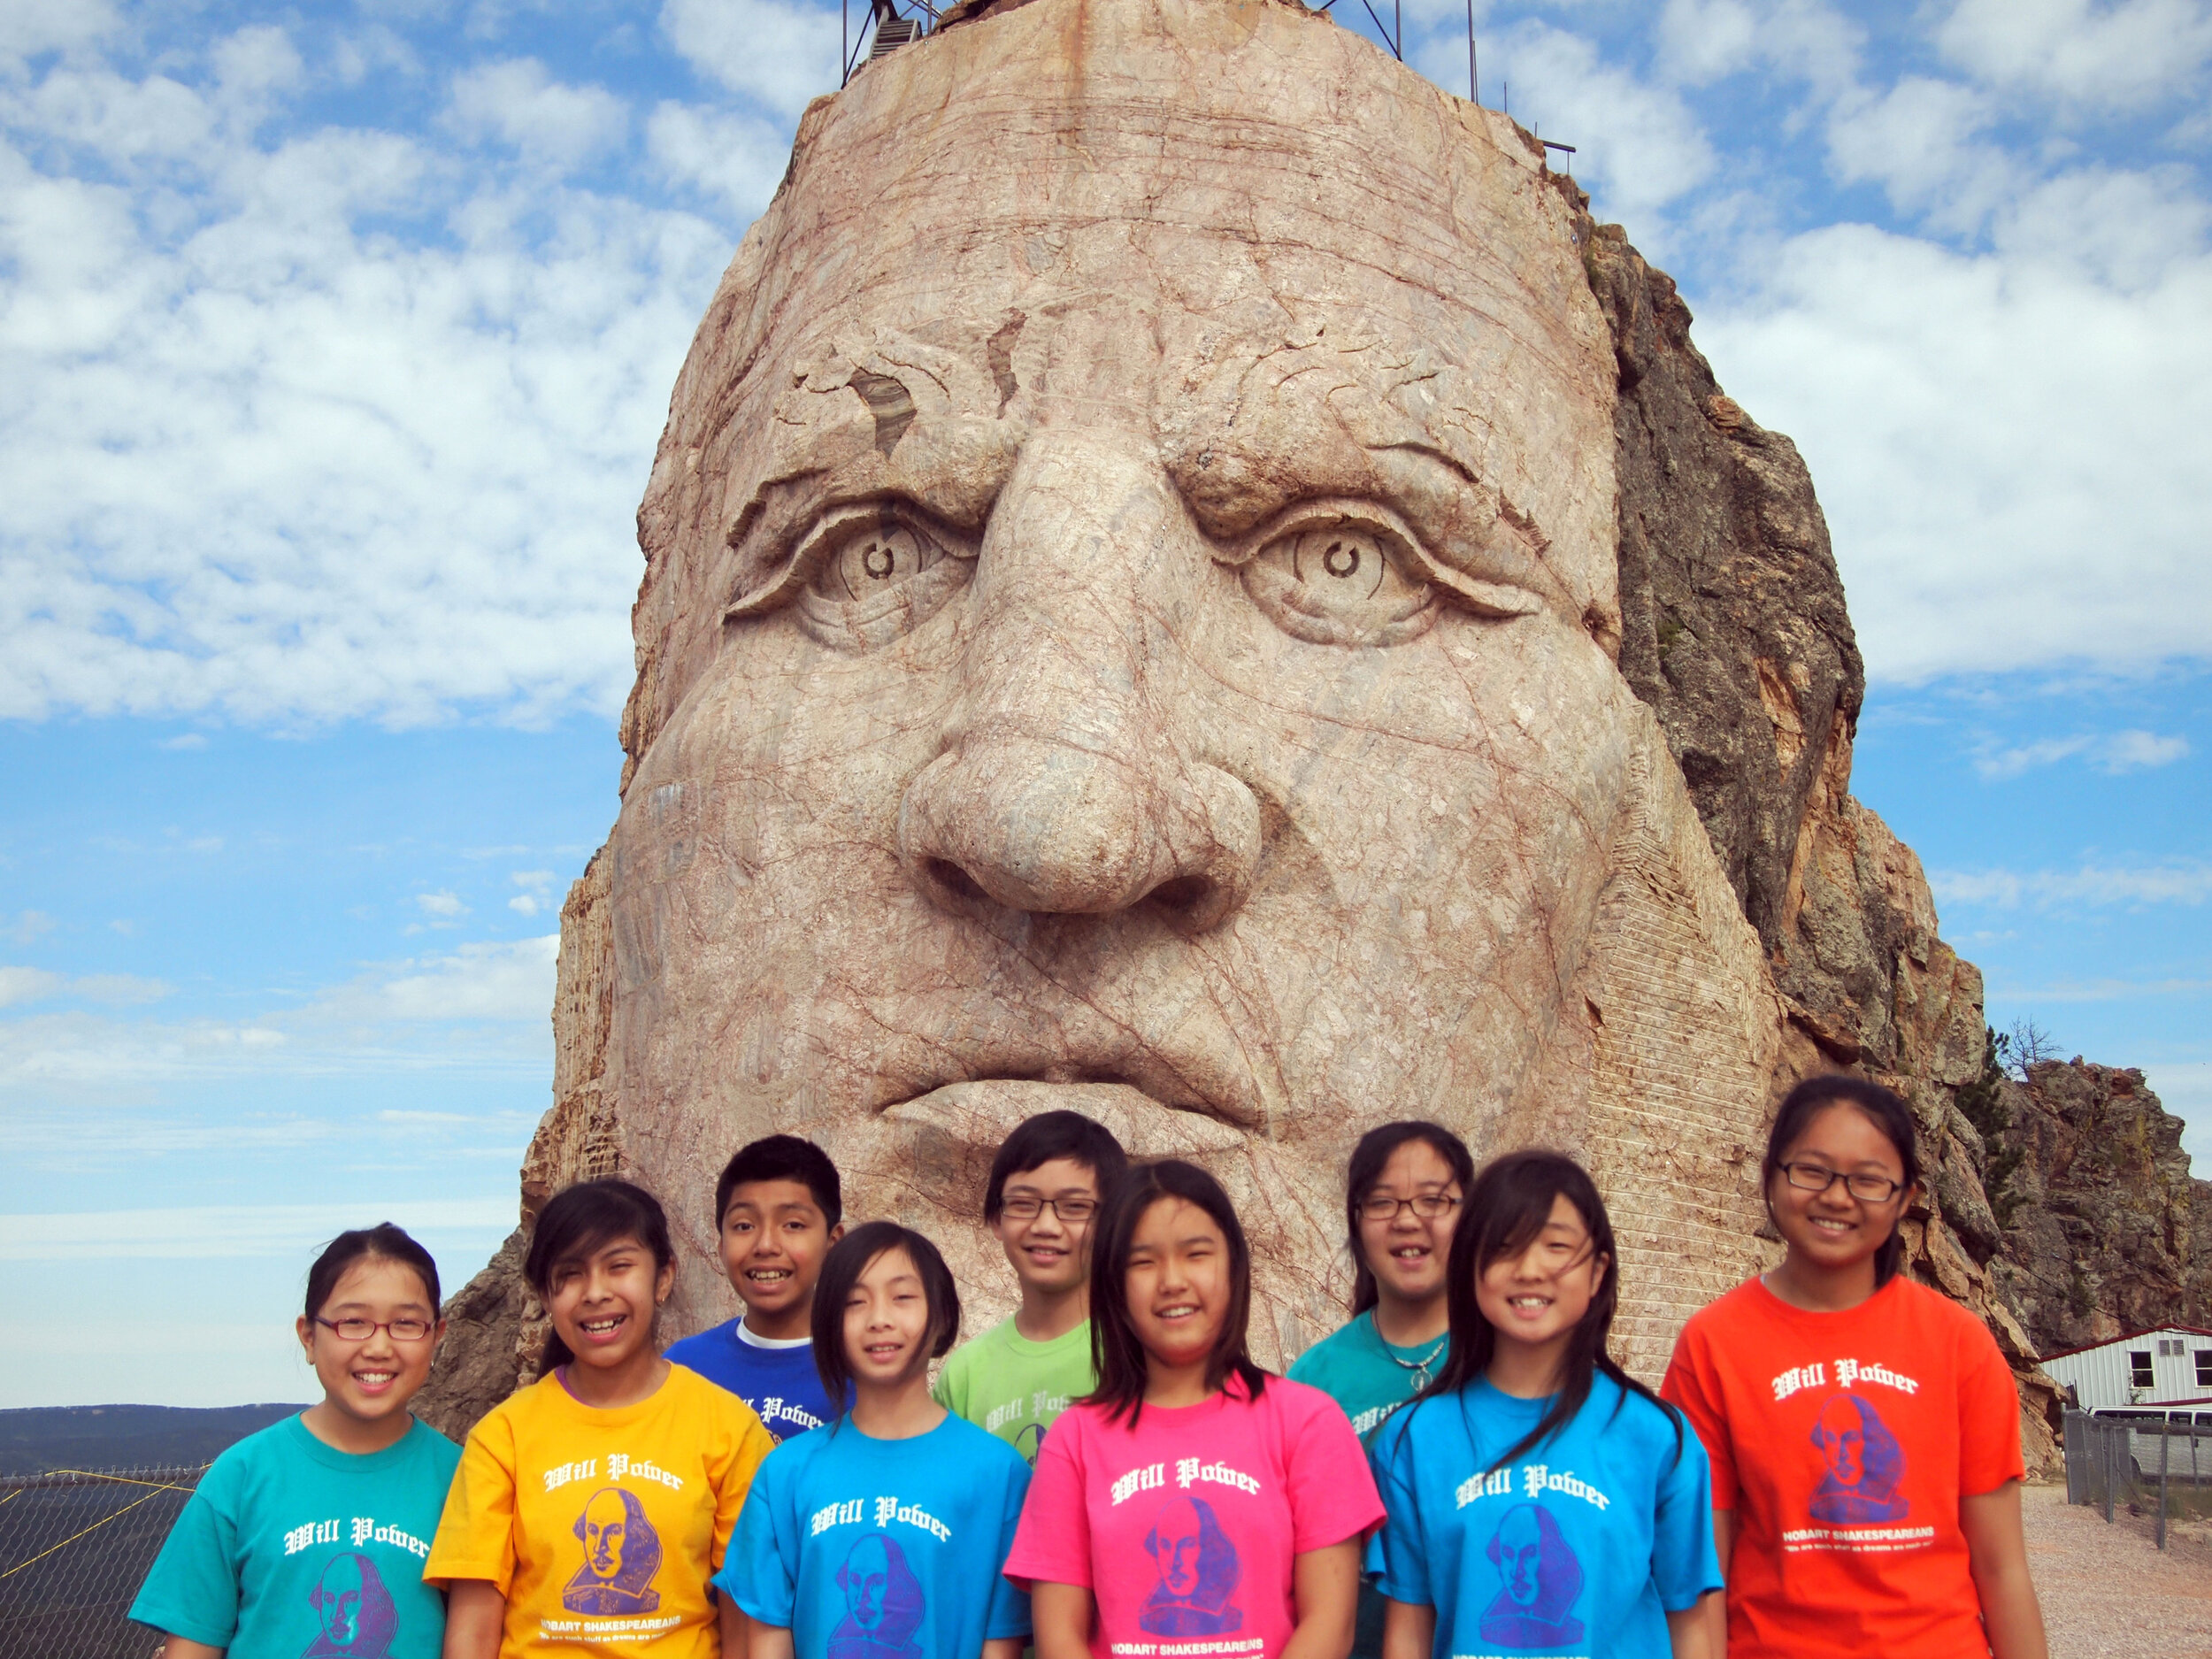  Crazy Horse Mountain: Standing with an Original Founding Father   Photo by Linda M. Uphoff  